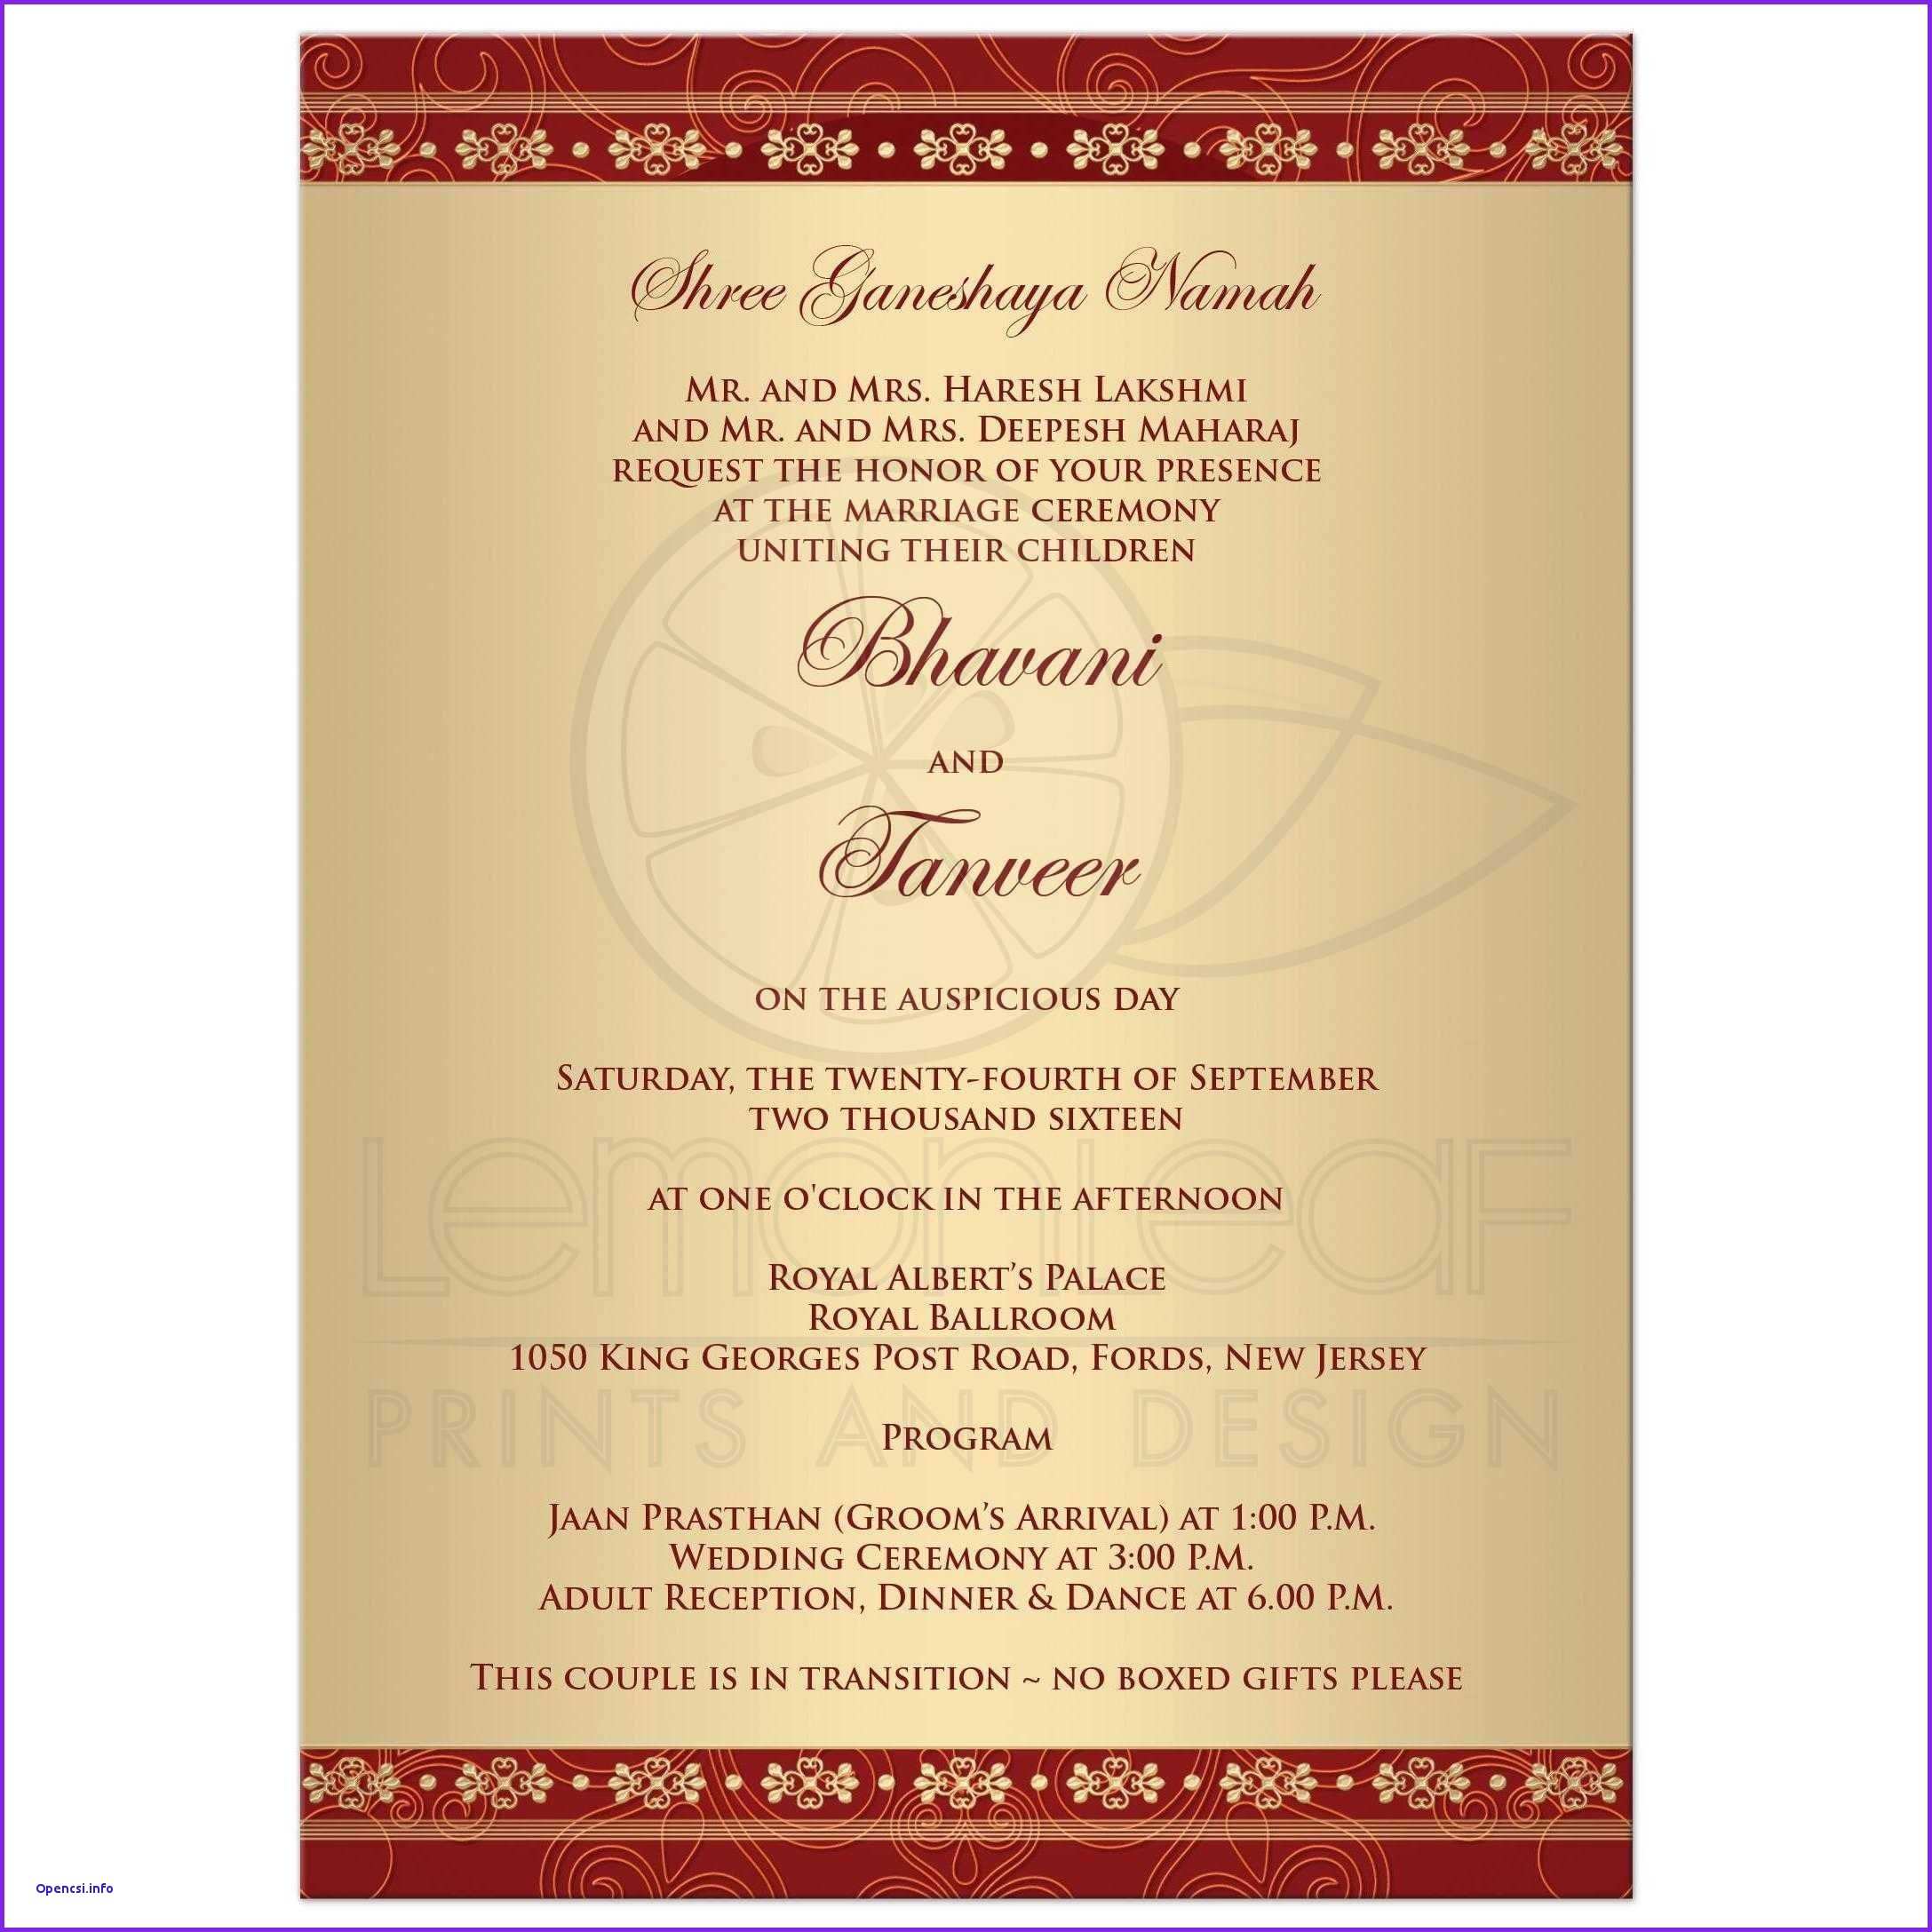 Invitation Card Format Marriage Cards Design Templates,Student Design Competitions